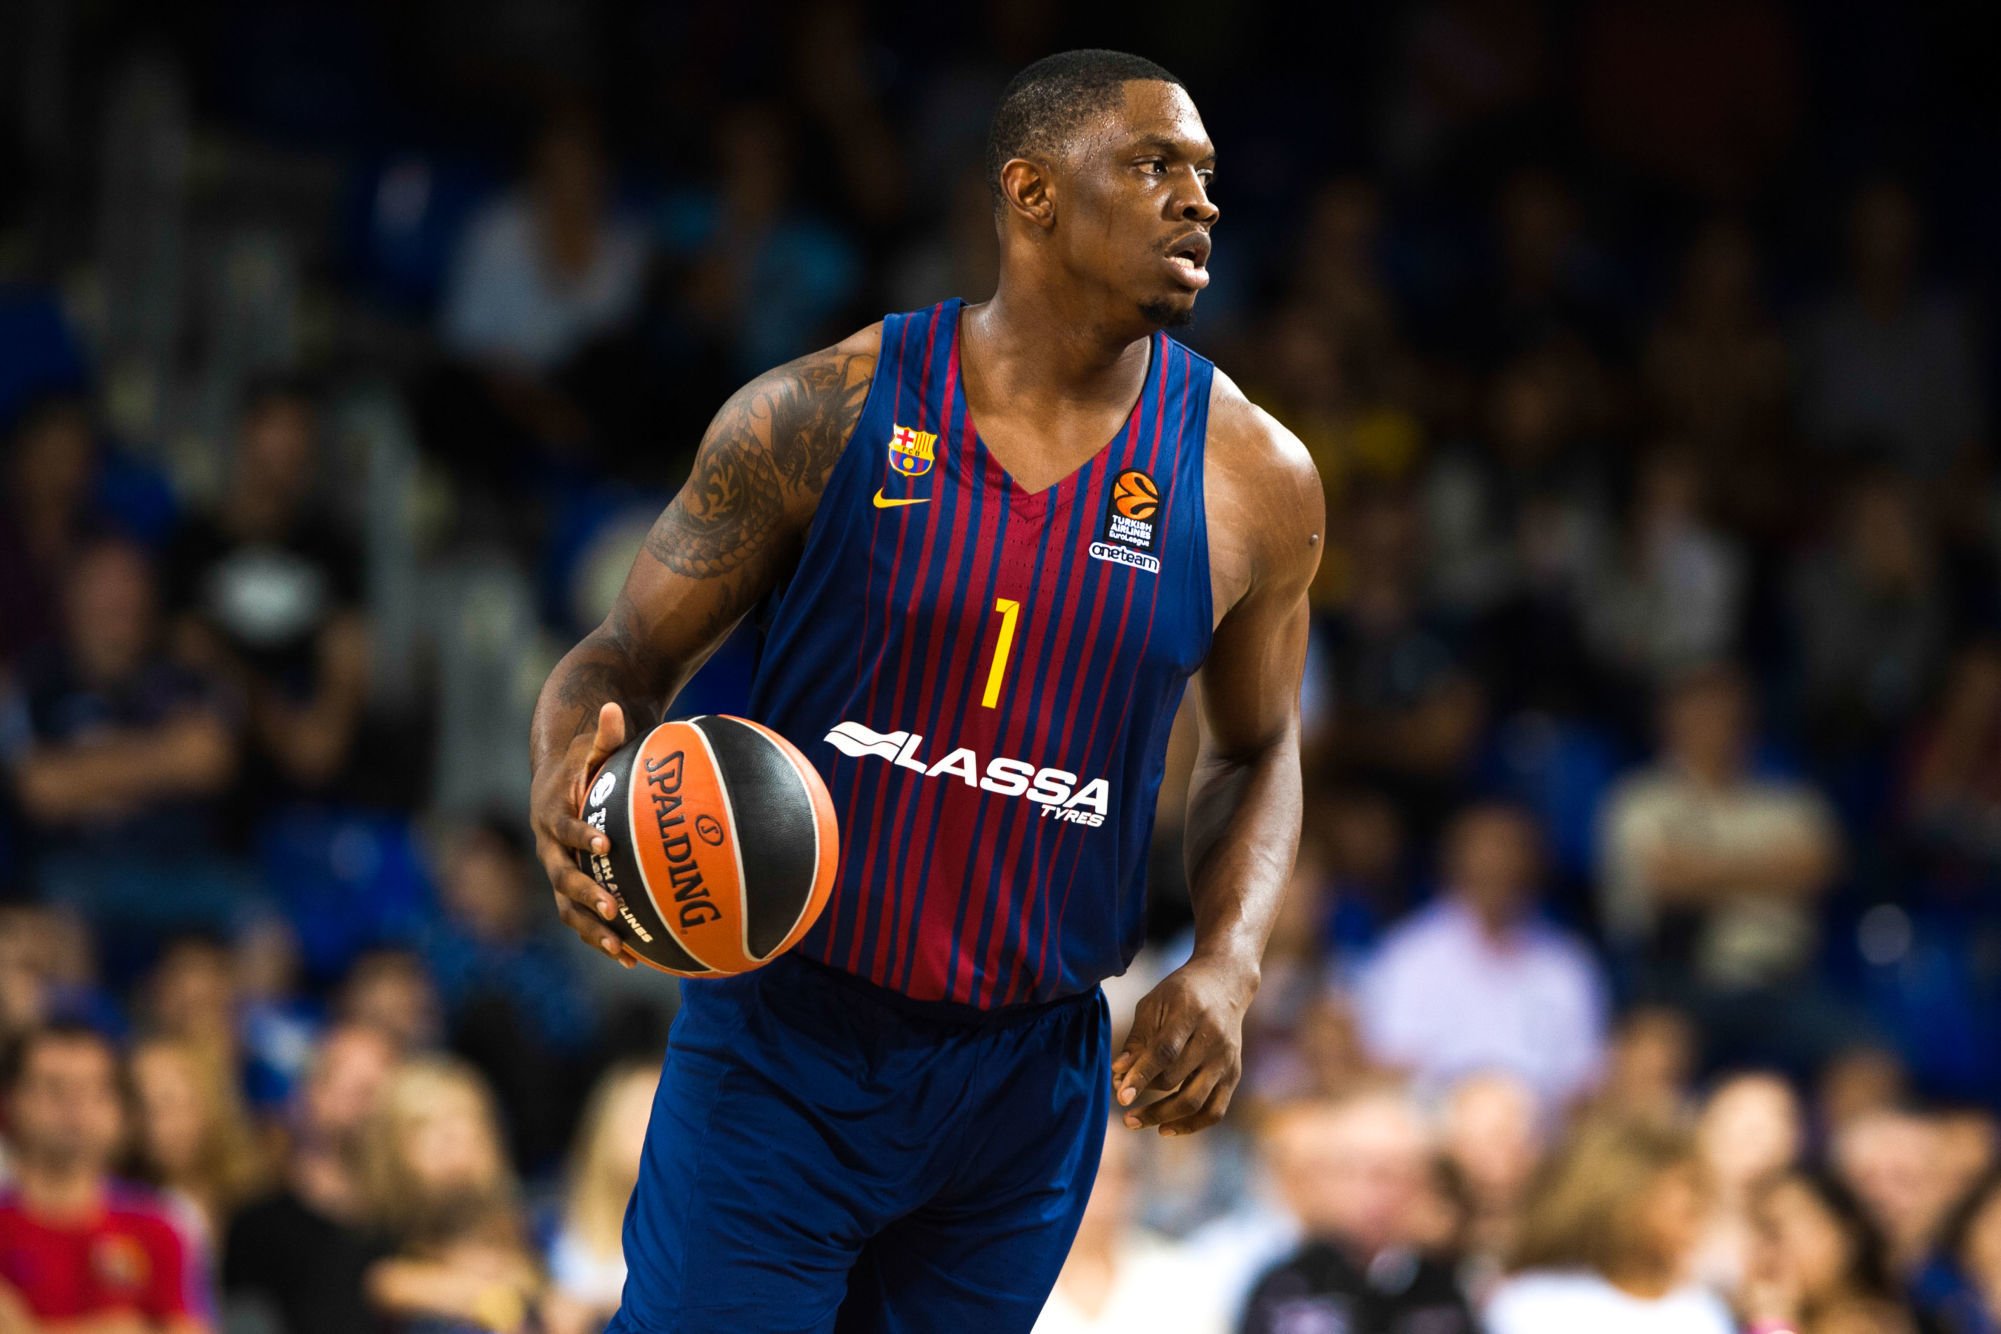 Kevin Seraphin during the EuroLeague match between Barcelona and Panathinaikos on 13th October 2017
Photo : Actionplus / Icon Sport